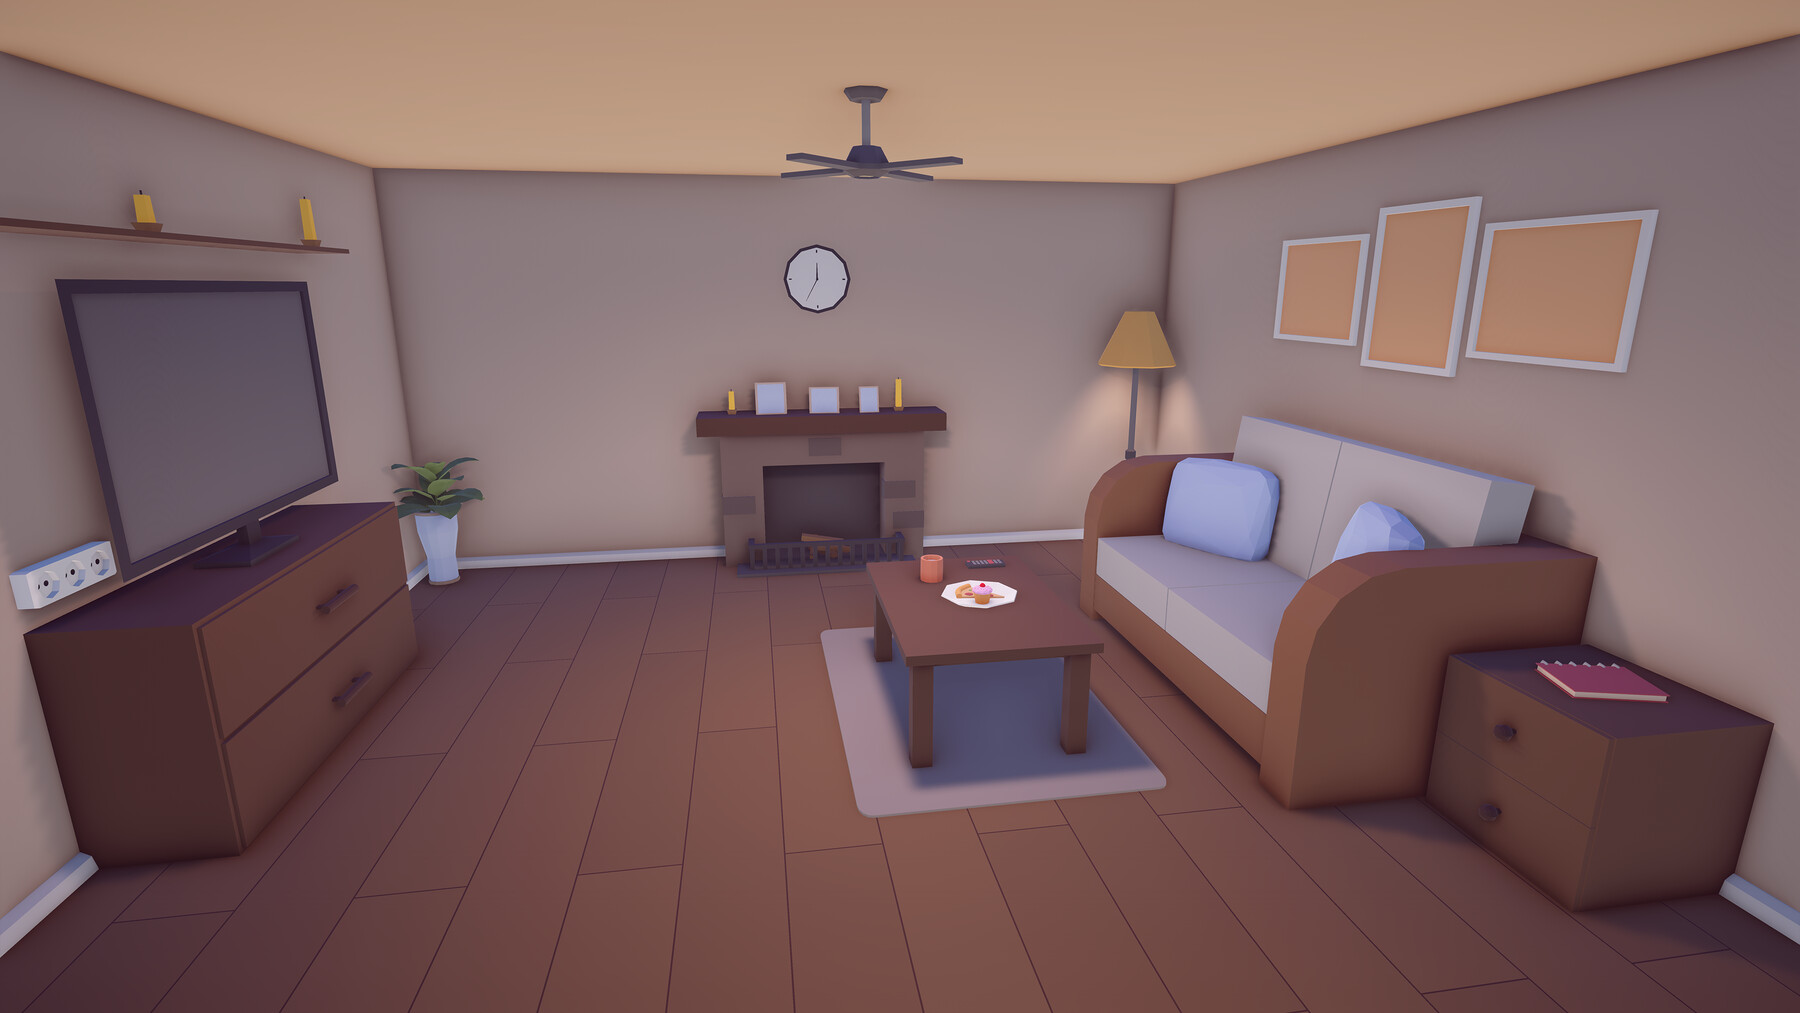 ArtStation - Low Poly Cartoon House Interiors | Game Assets